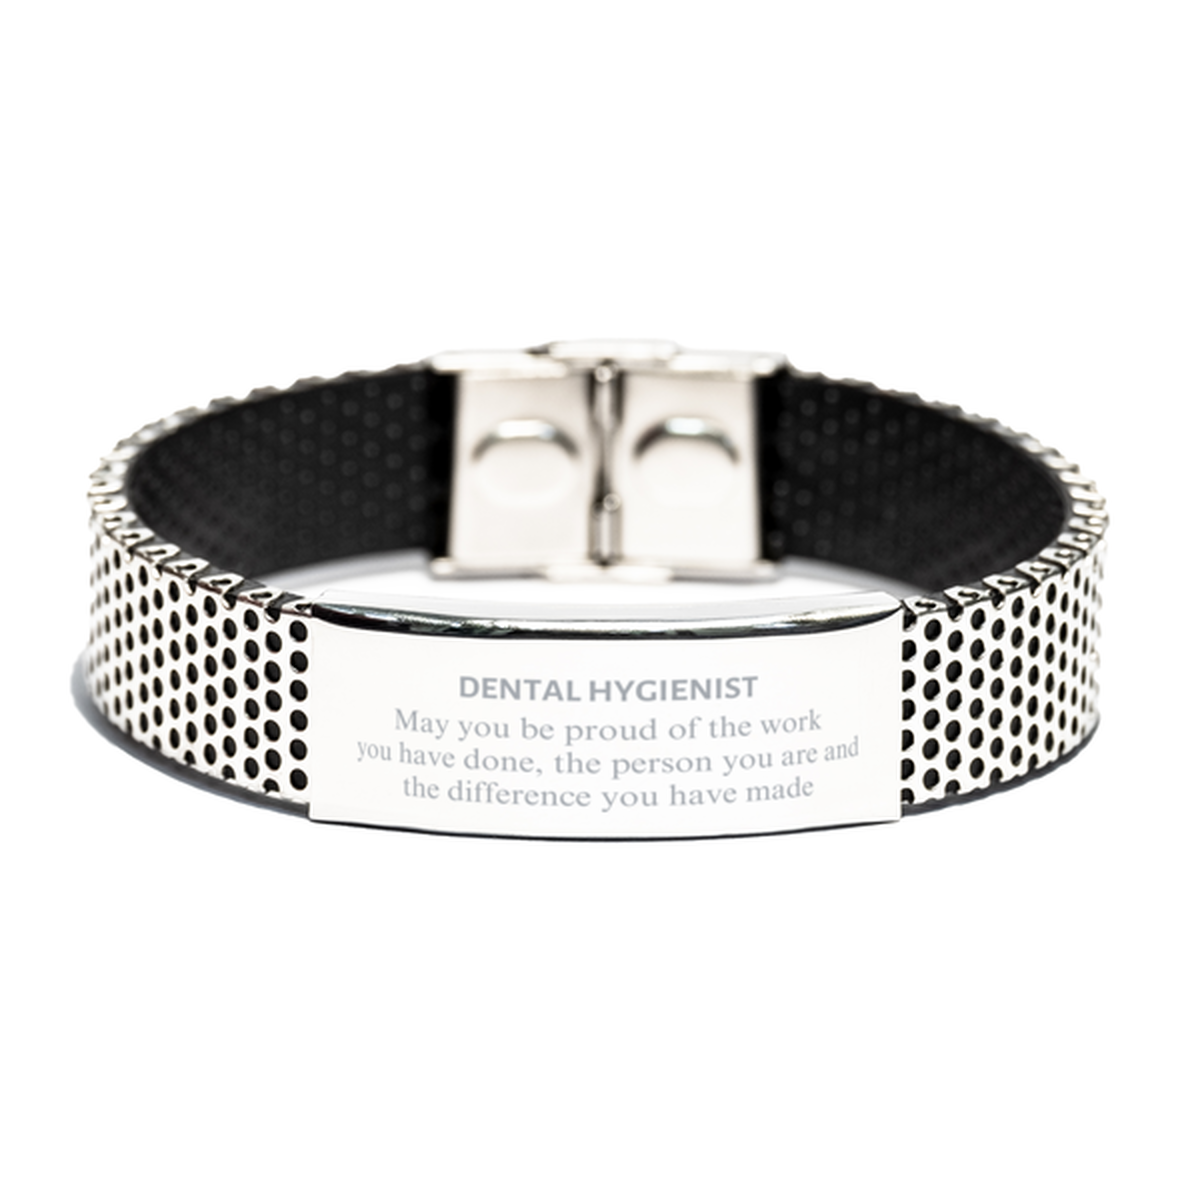 Dental Hygienist May you be proud of the work you have done, Retirement Dental Hygienist Stainless Steel Bracelet for Colleague Appreciation Gifts Amazing for Dental Hygienist